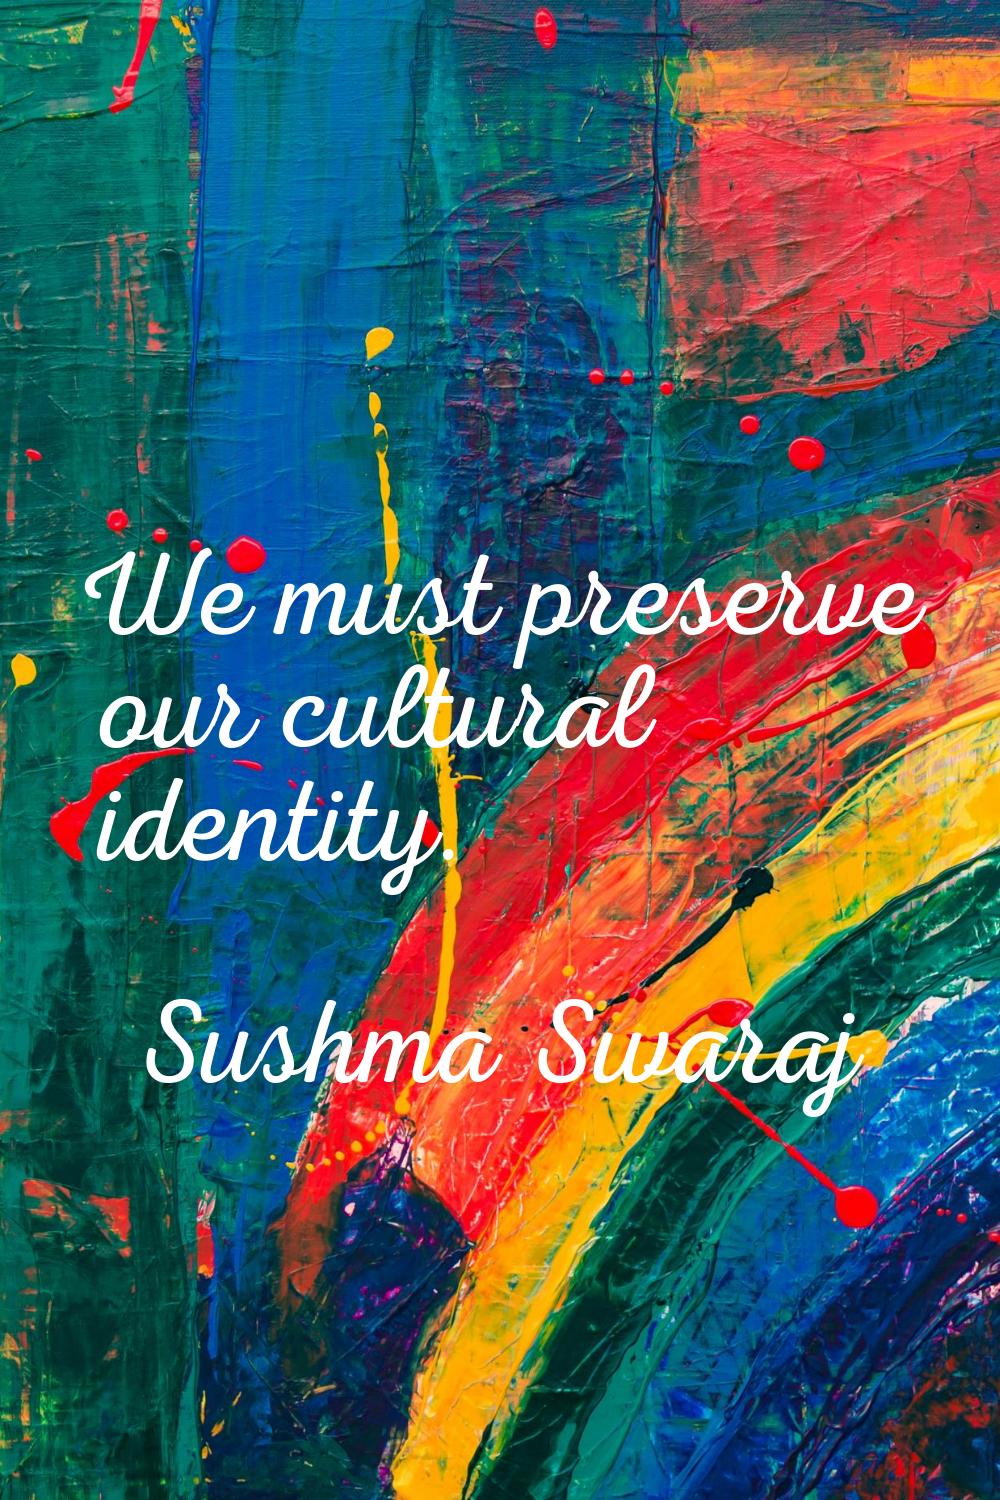 We must preserve our cultural identity.